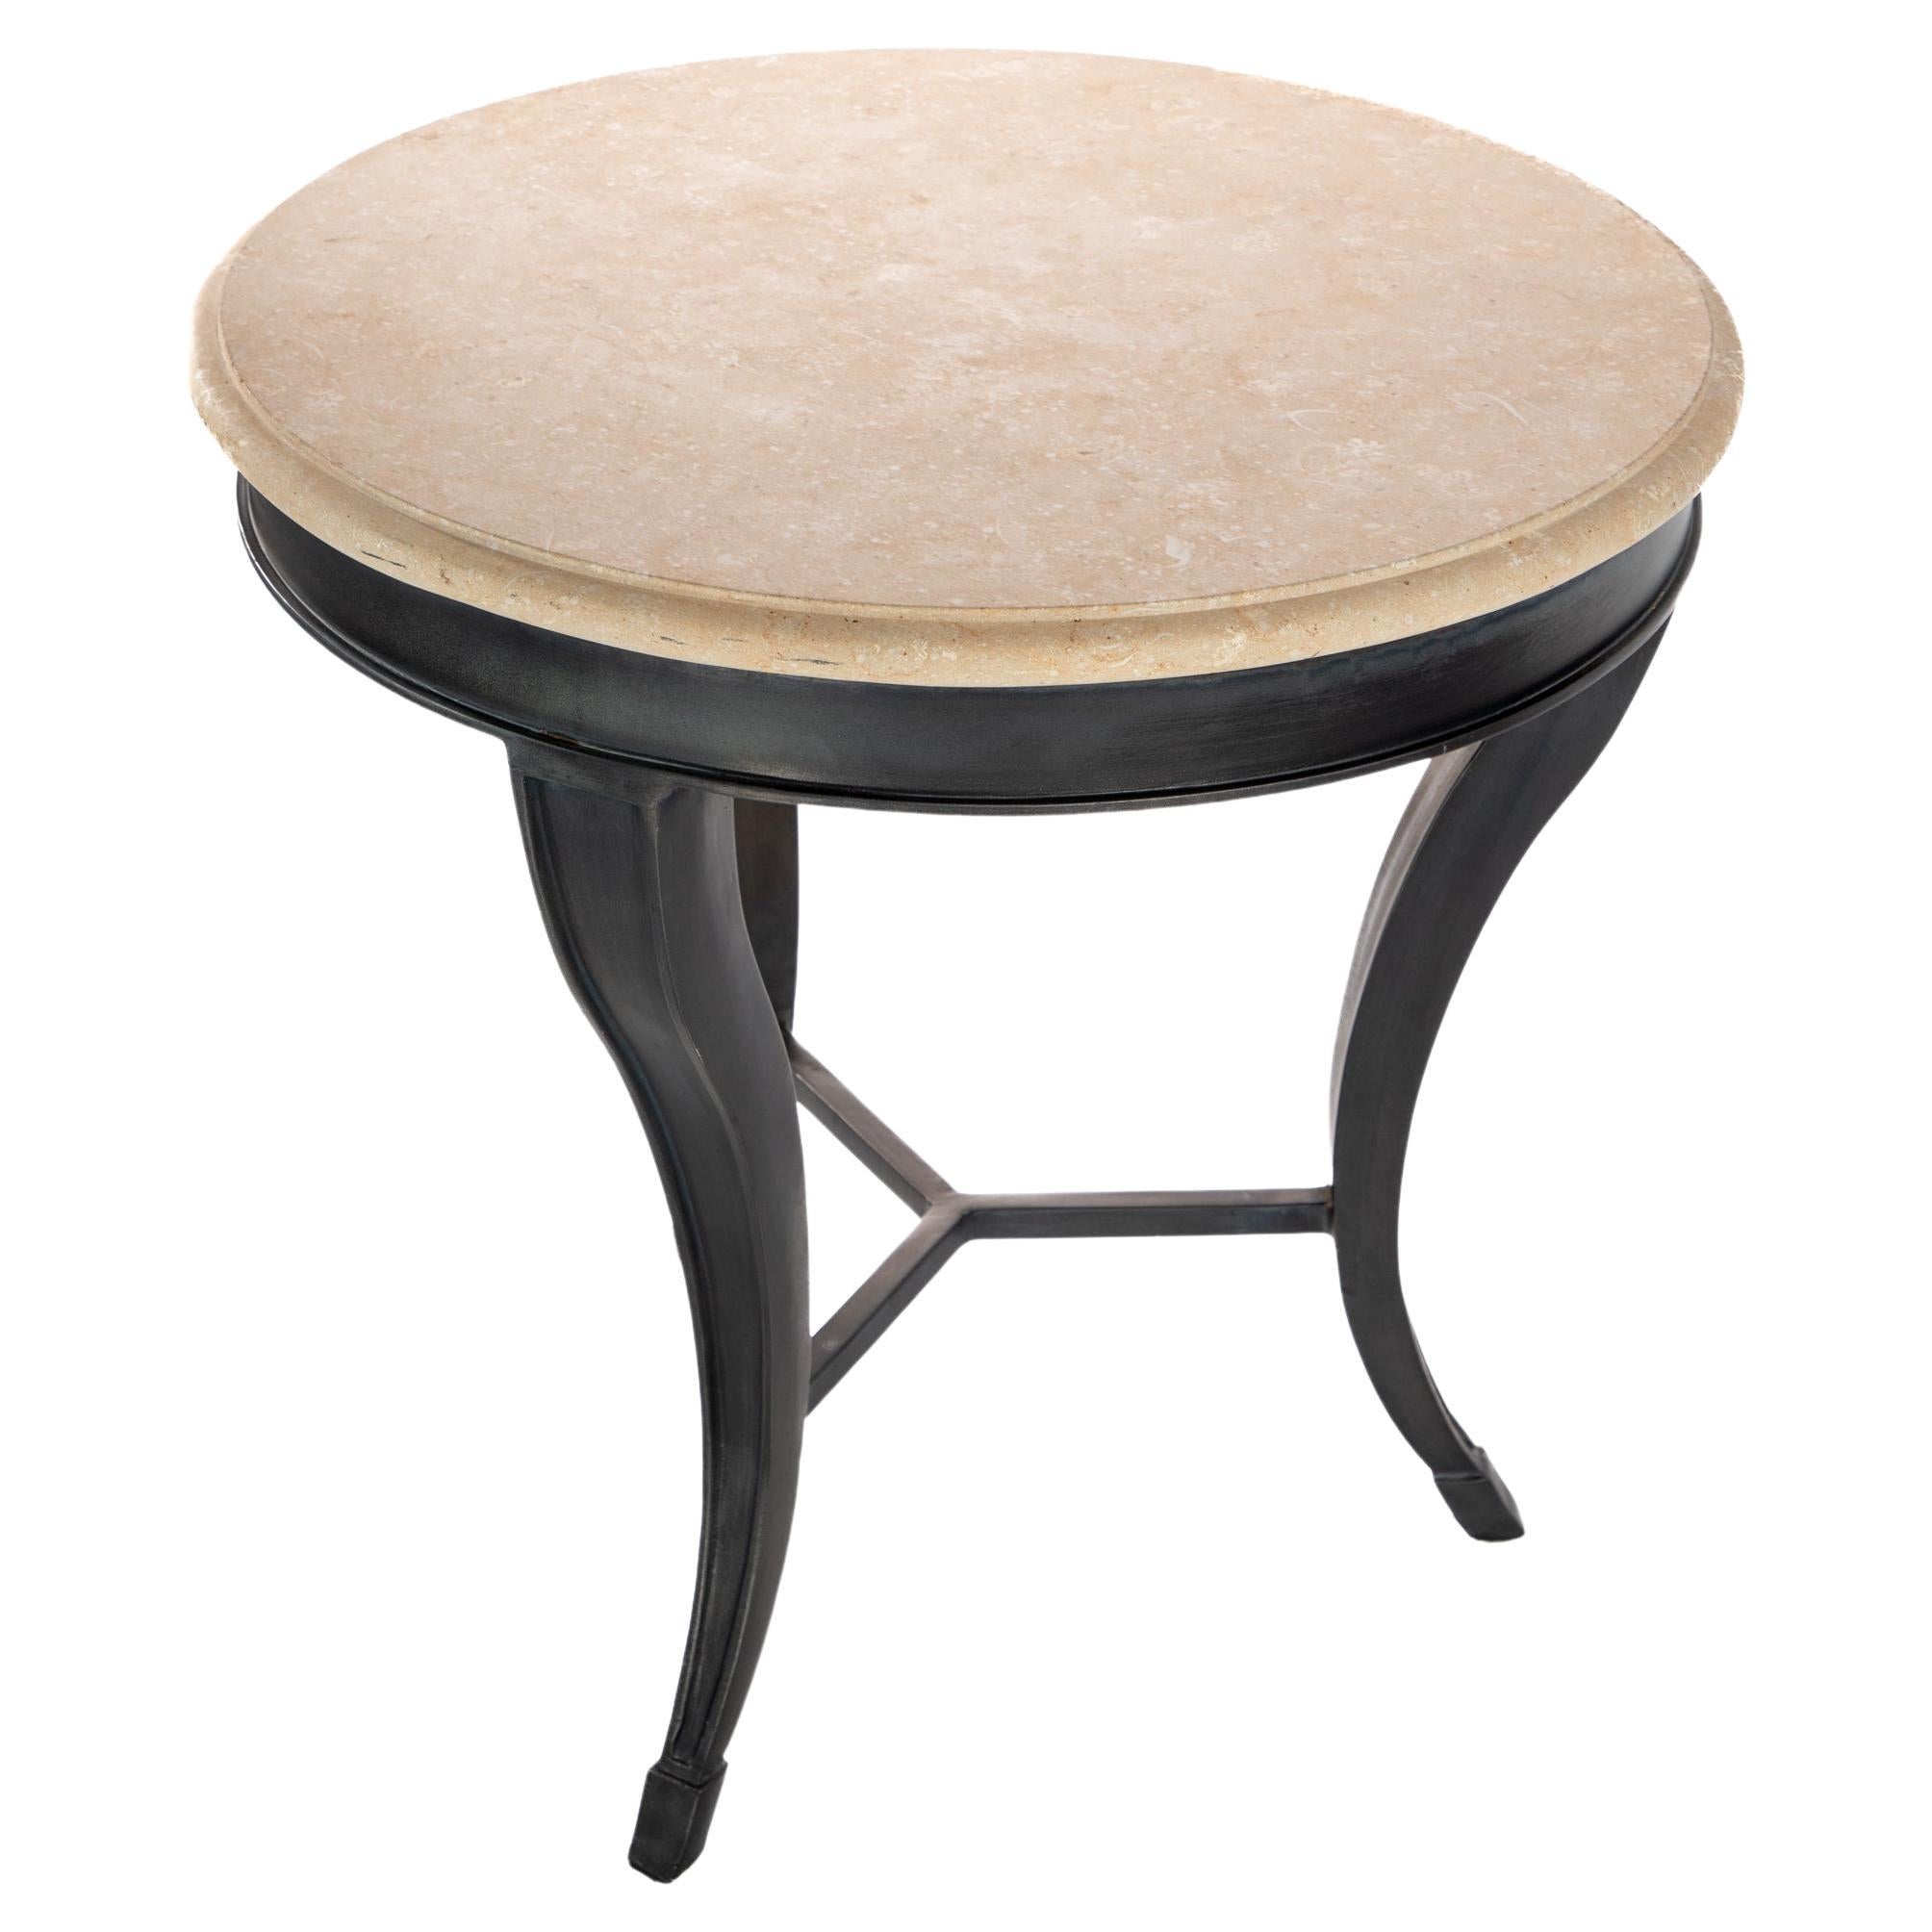 Wonderful Steel End Table with Stone Top